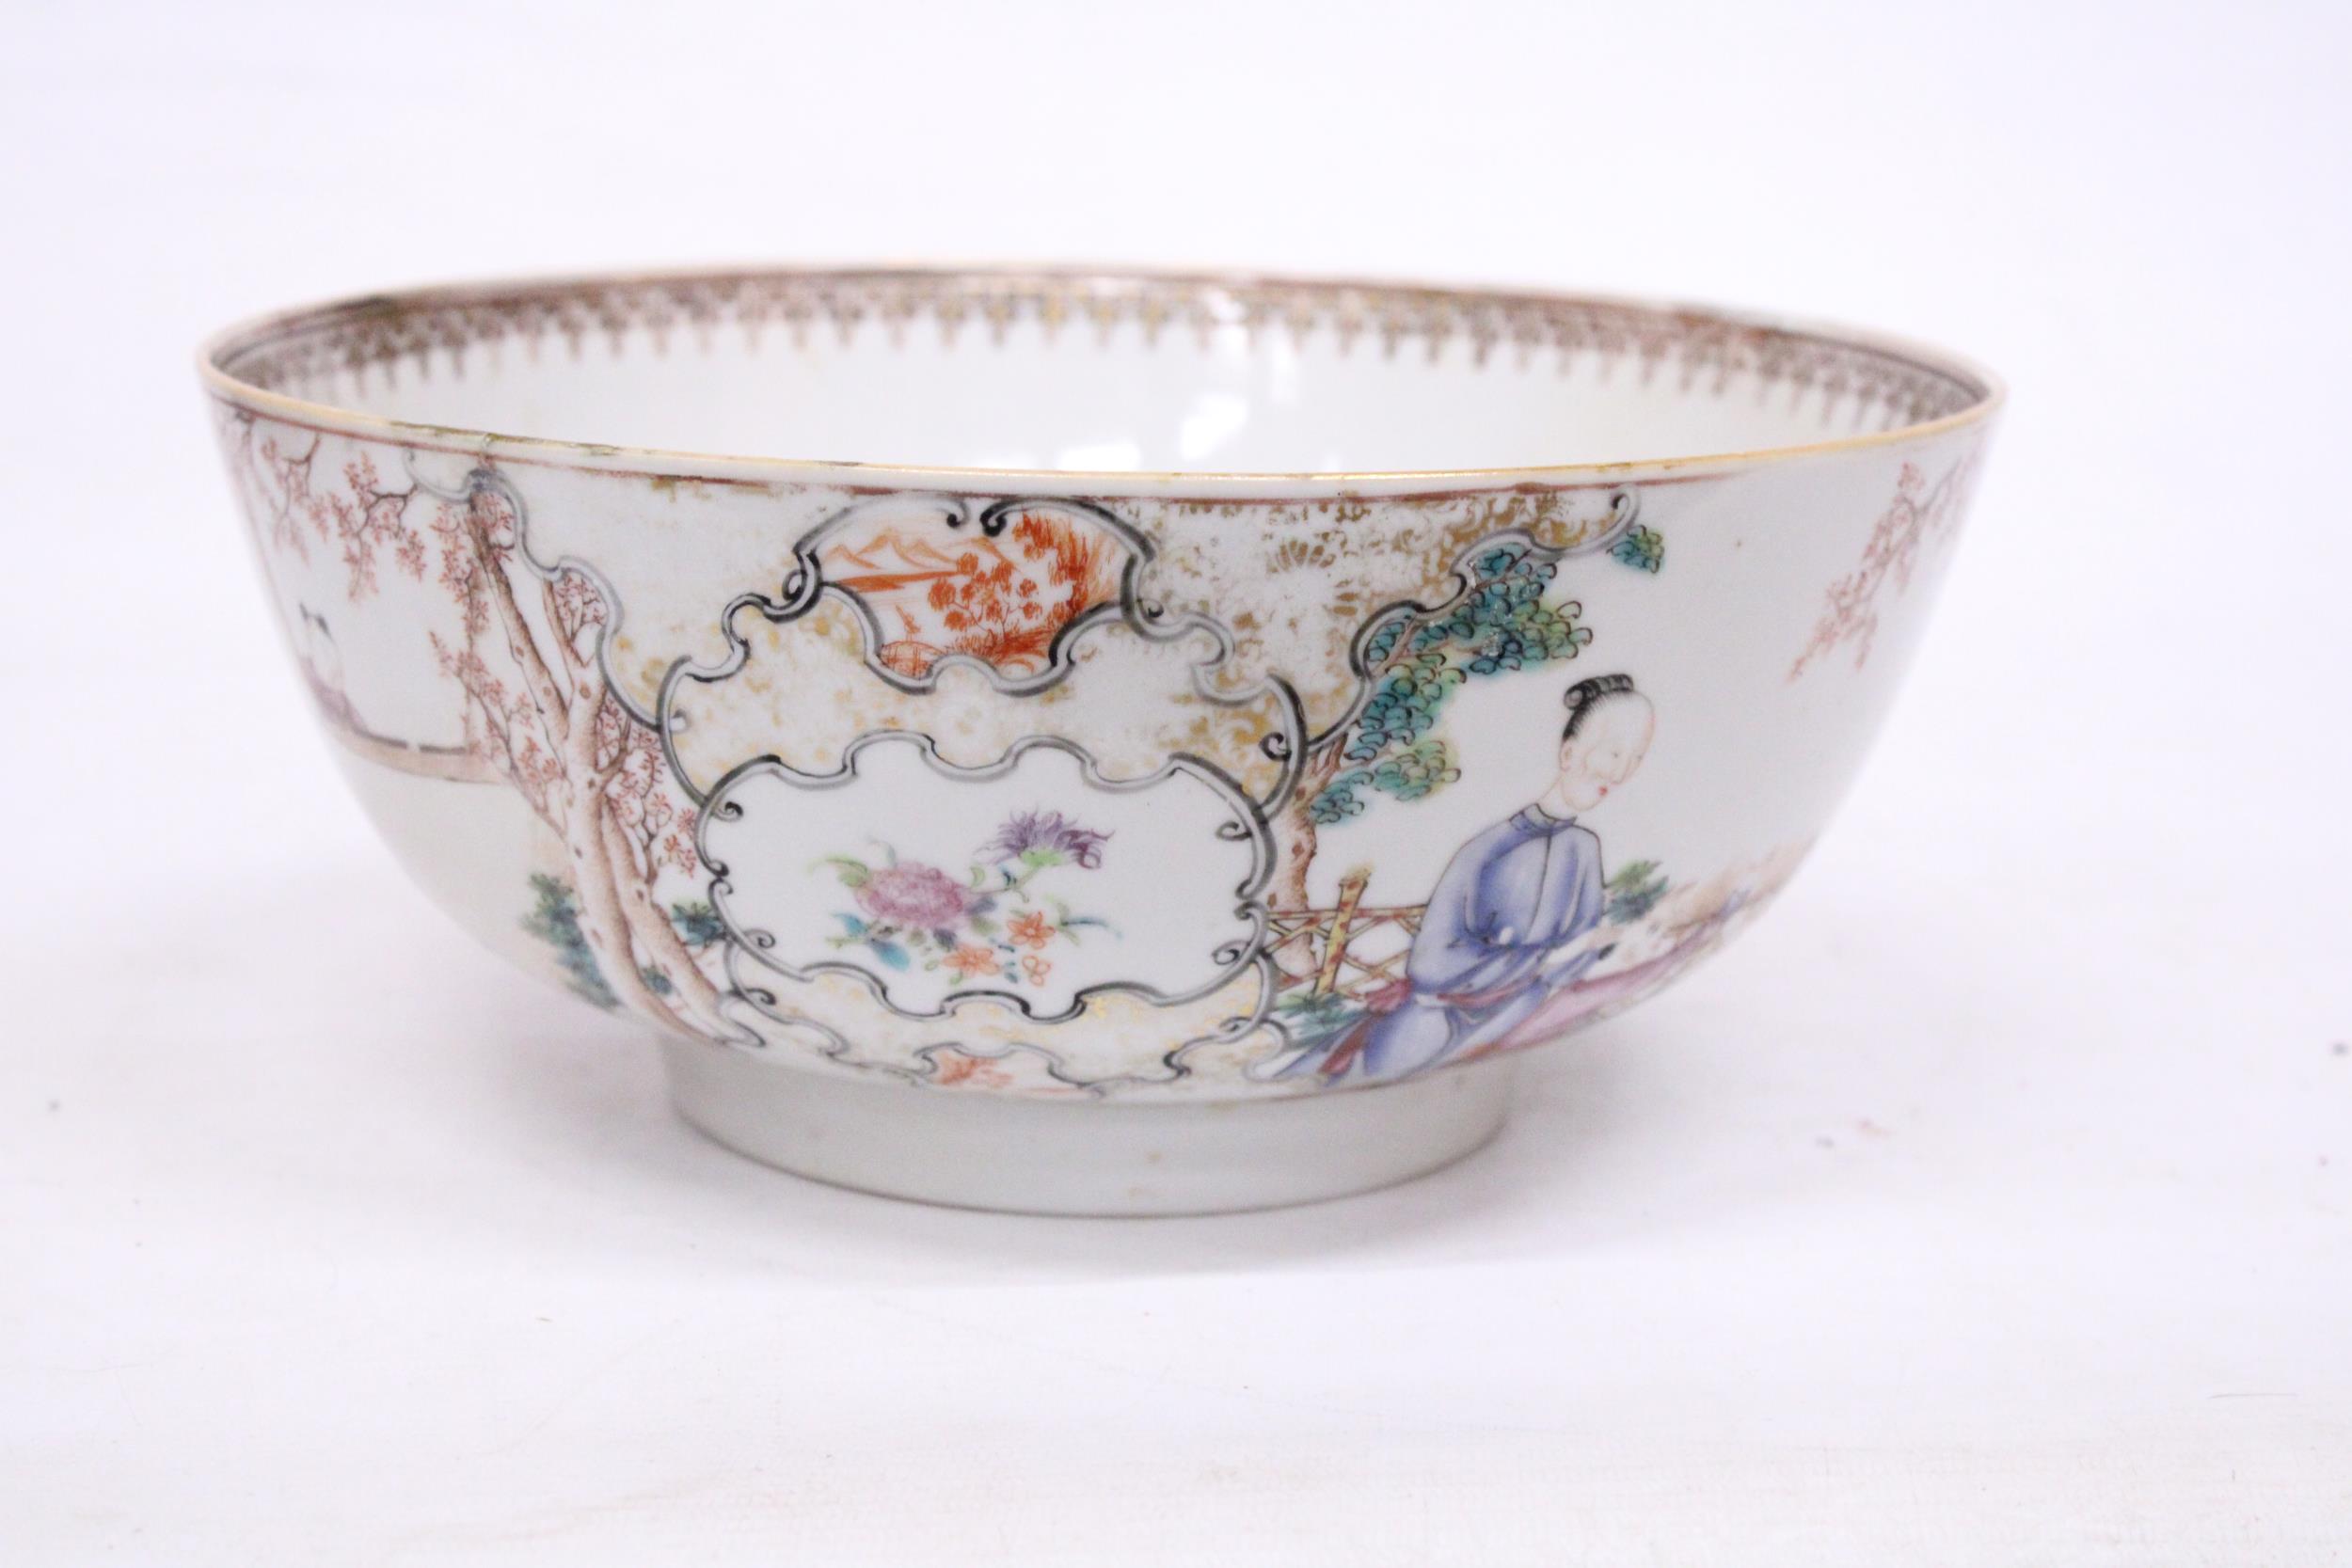 A CHINESE EXPORT FIGURAL DESIGN FOOTED BOWL - 11 CM (H) - 25.5 (D) - Image 4 of 7